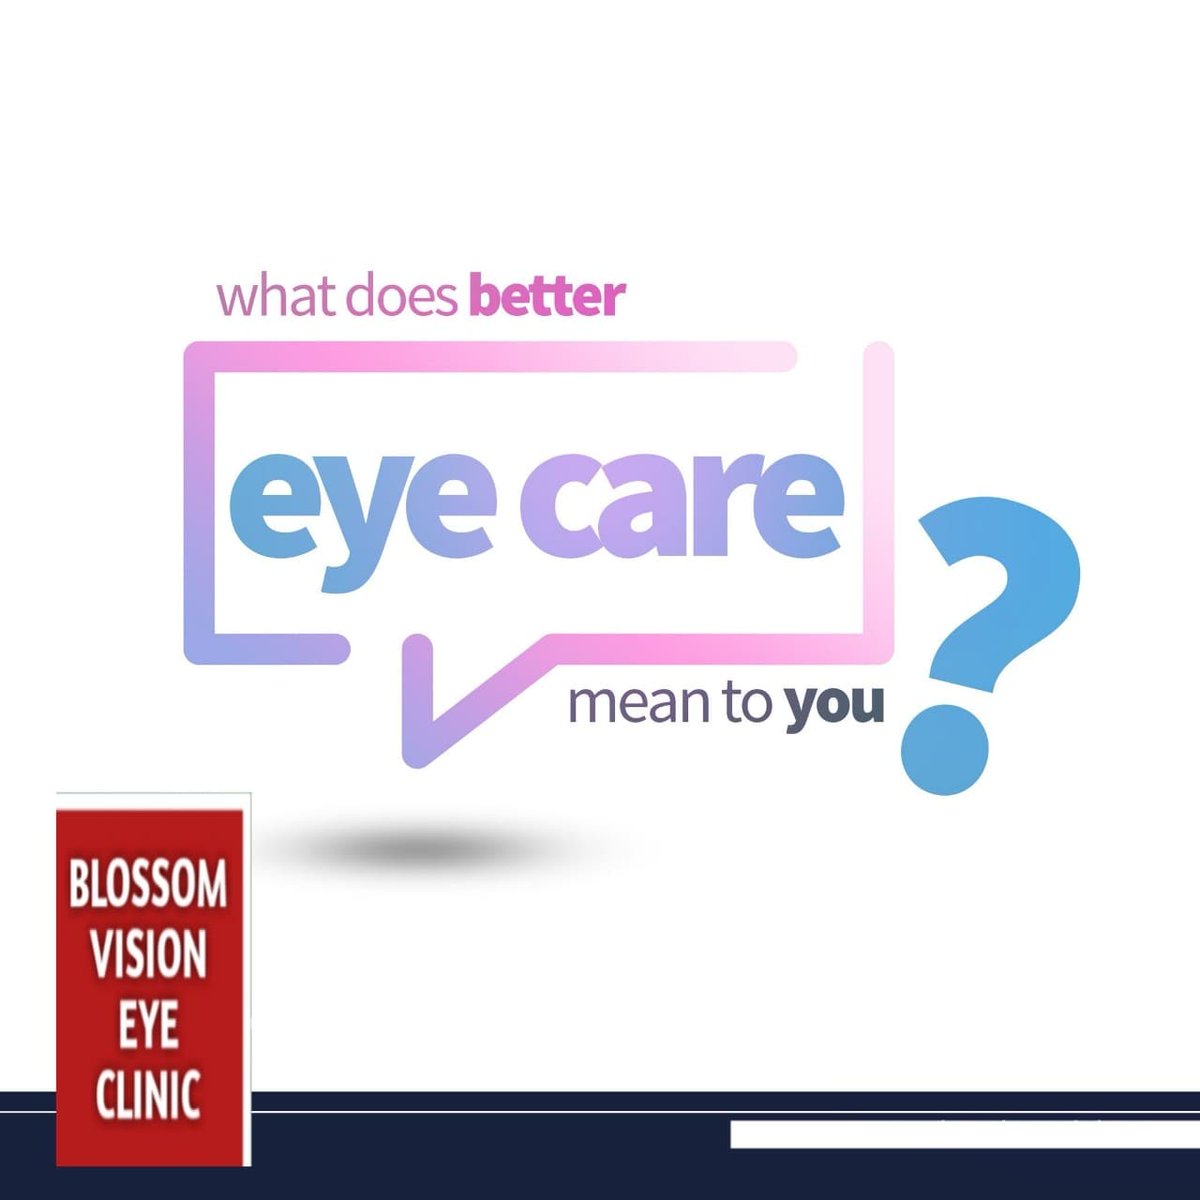 Better Eye care means  preventive maintenance  to us, You can think of regular visits to the eye doctor as “preventative maintenance” for the rest of your body. 
@abujaretweets @ABUJAPLUG @abujastreets @Mayordeyforyou @potam1304